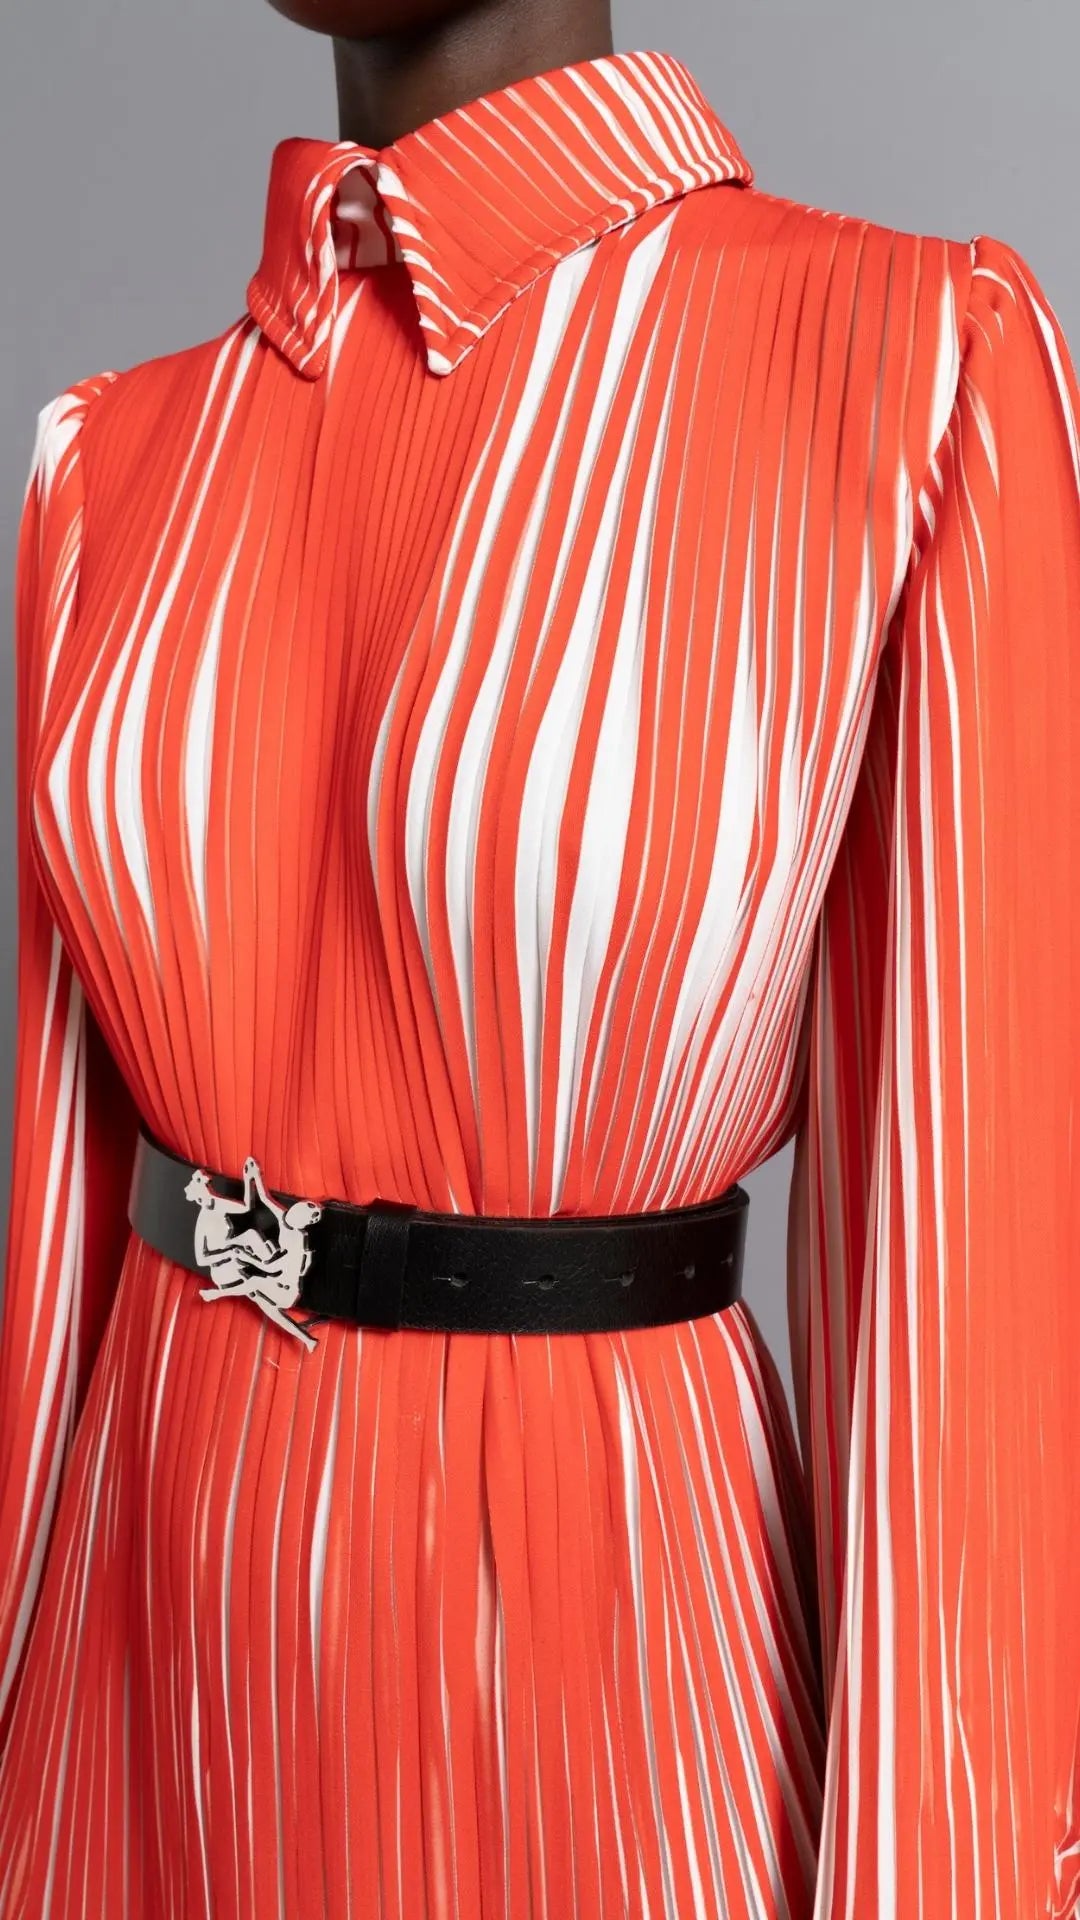 Thebe Magugu Chevron Pleated Dress. Stunning tomato red and white pleated dress with a collar, fitted waist and double chevron hem at the sleeves. It features a hidden zipper in the back. Close up of detailed pleated and collar.